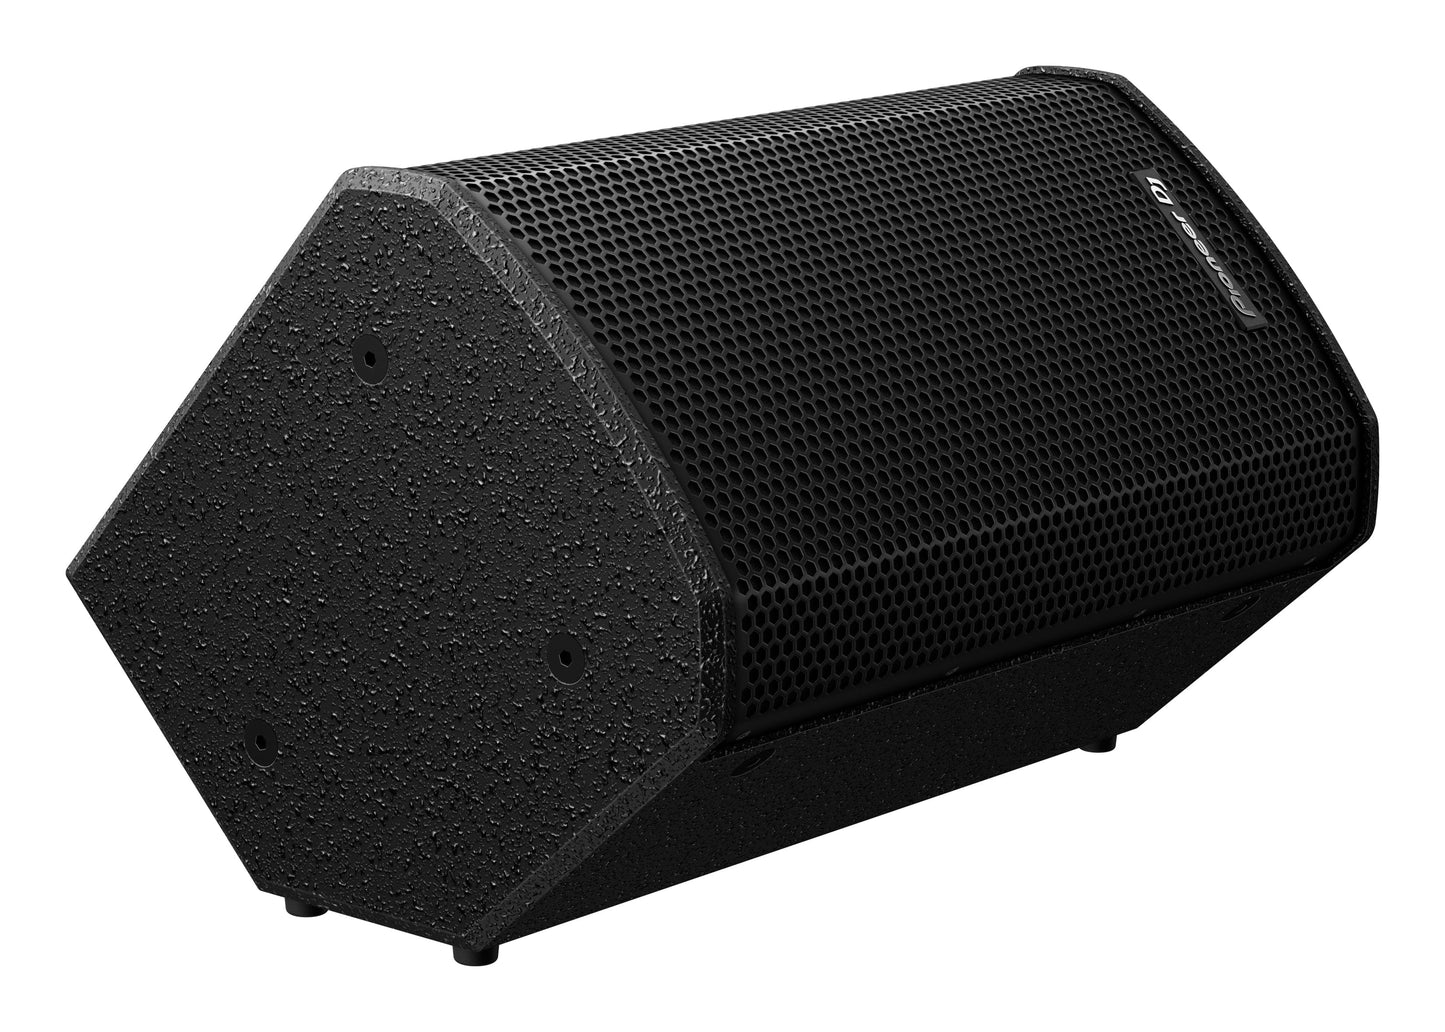 Pioneer DJ XPRS82 Multi-Purpose 2-Way Active 8-Inch Loudspeaker with DSP - PSSL ProSound and Stage Lighting